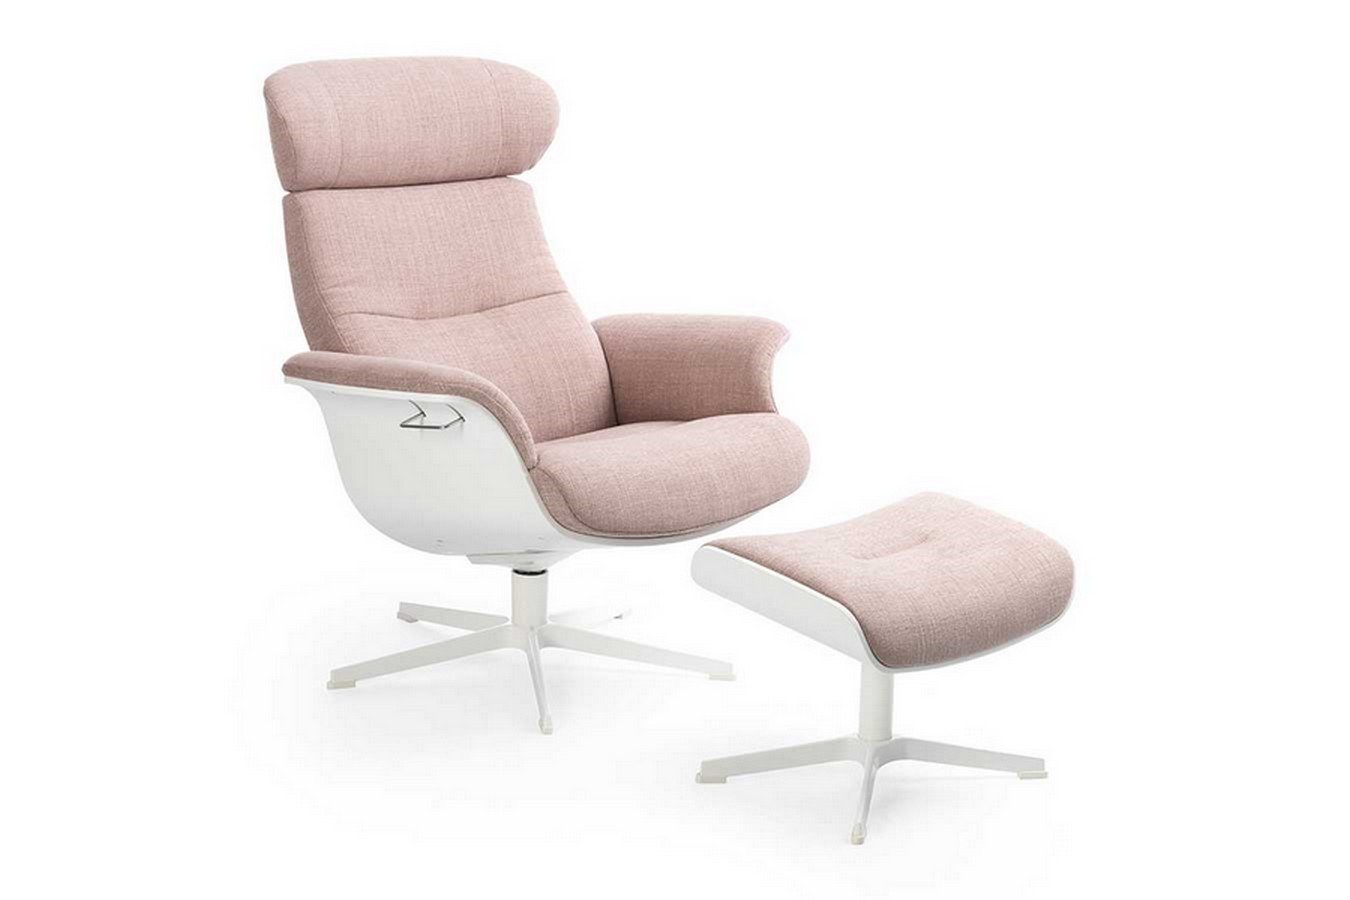 daslagerhaus Stoff Timeout ohne living in aus Drehsessel Conform pink Loungesessel